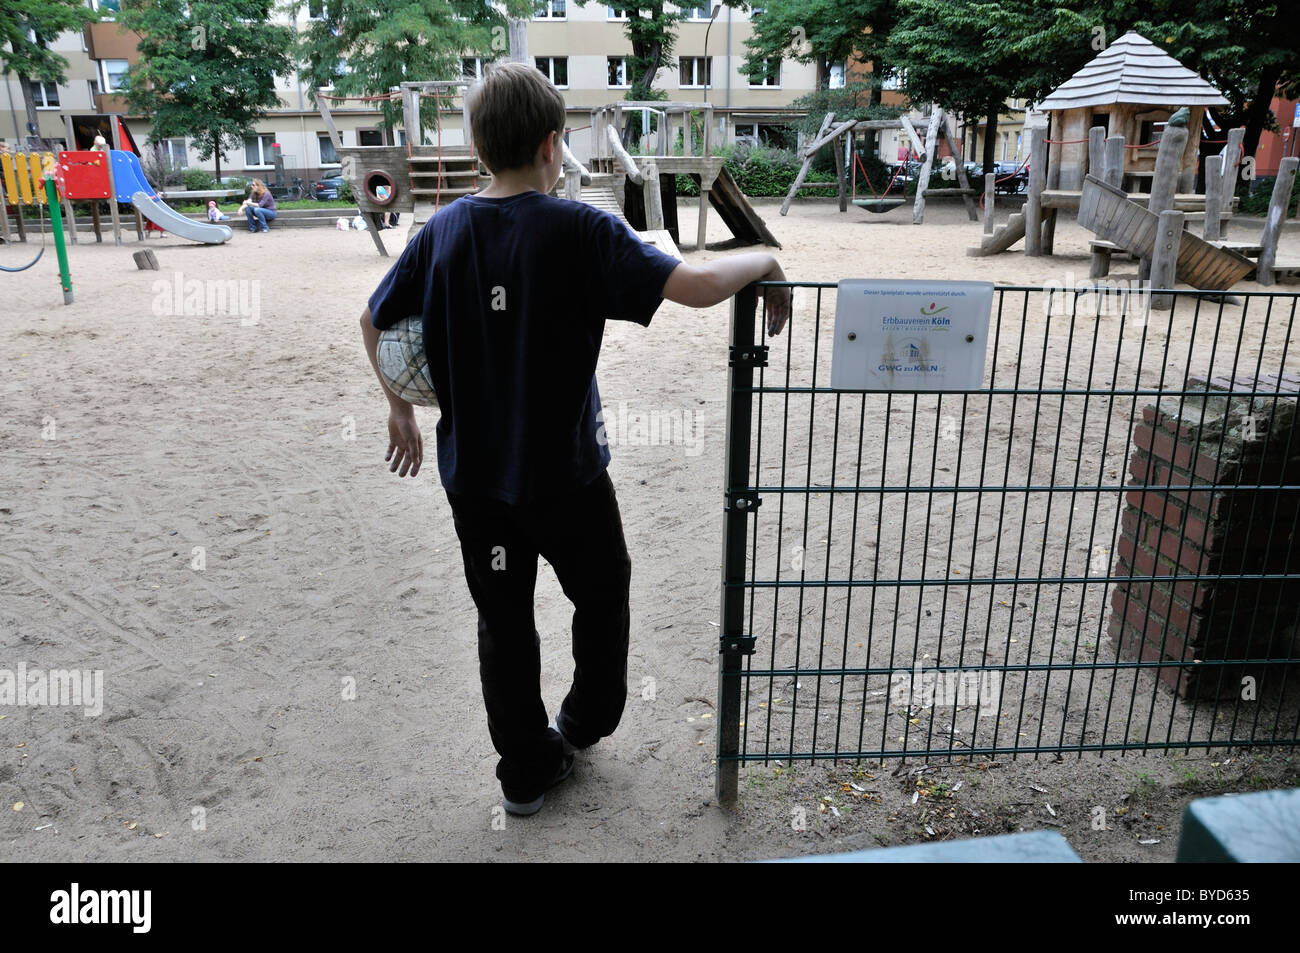 Lonely boy, 10 years, at the entrance to a playground, Cologne, North Rhine-Westphalia, Germany, Europe Stock Photo